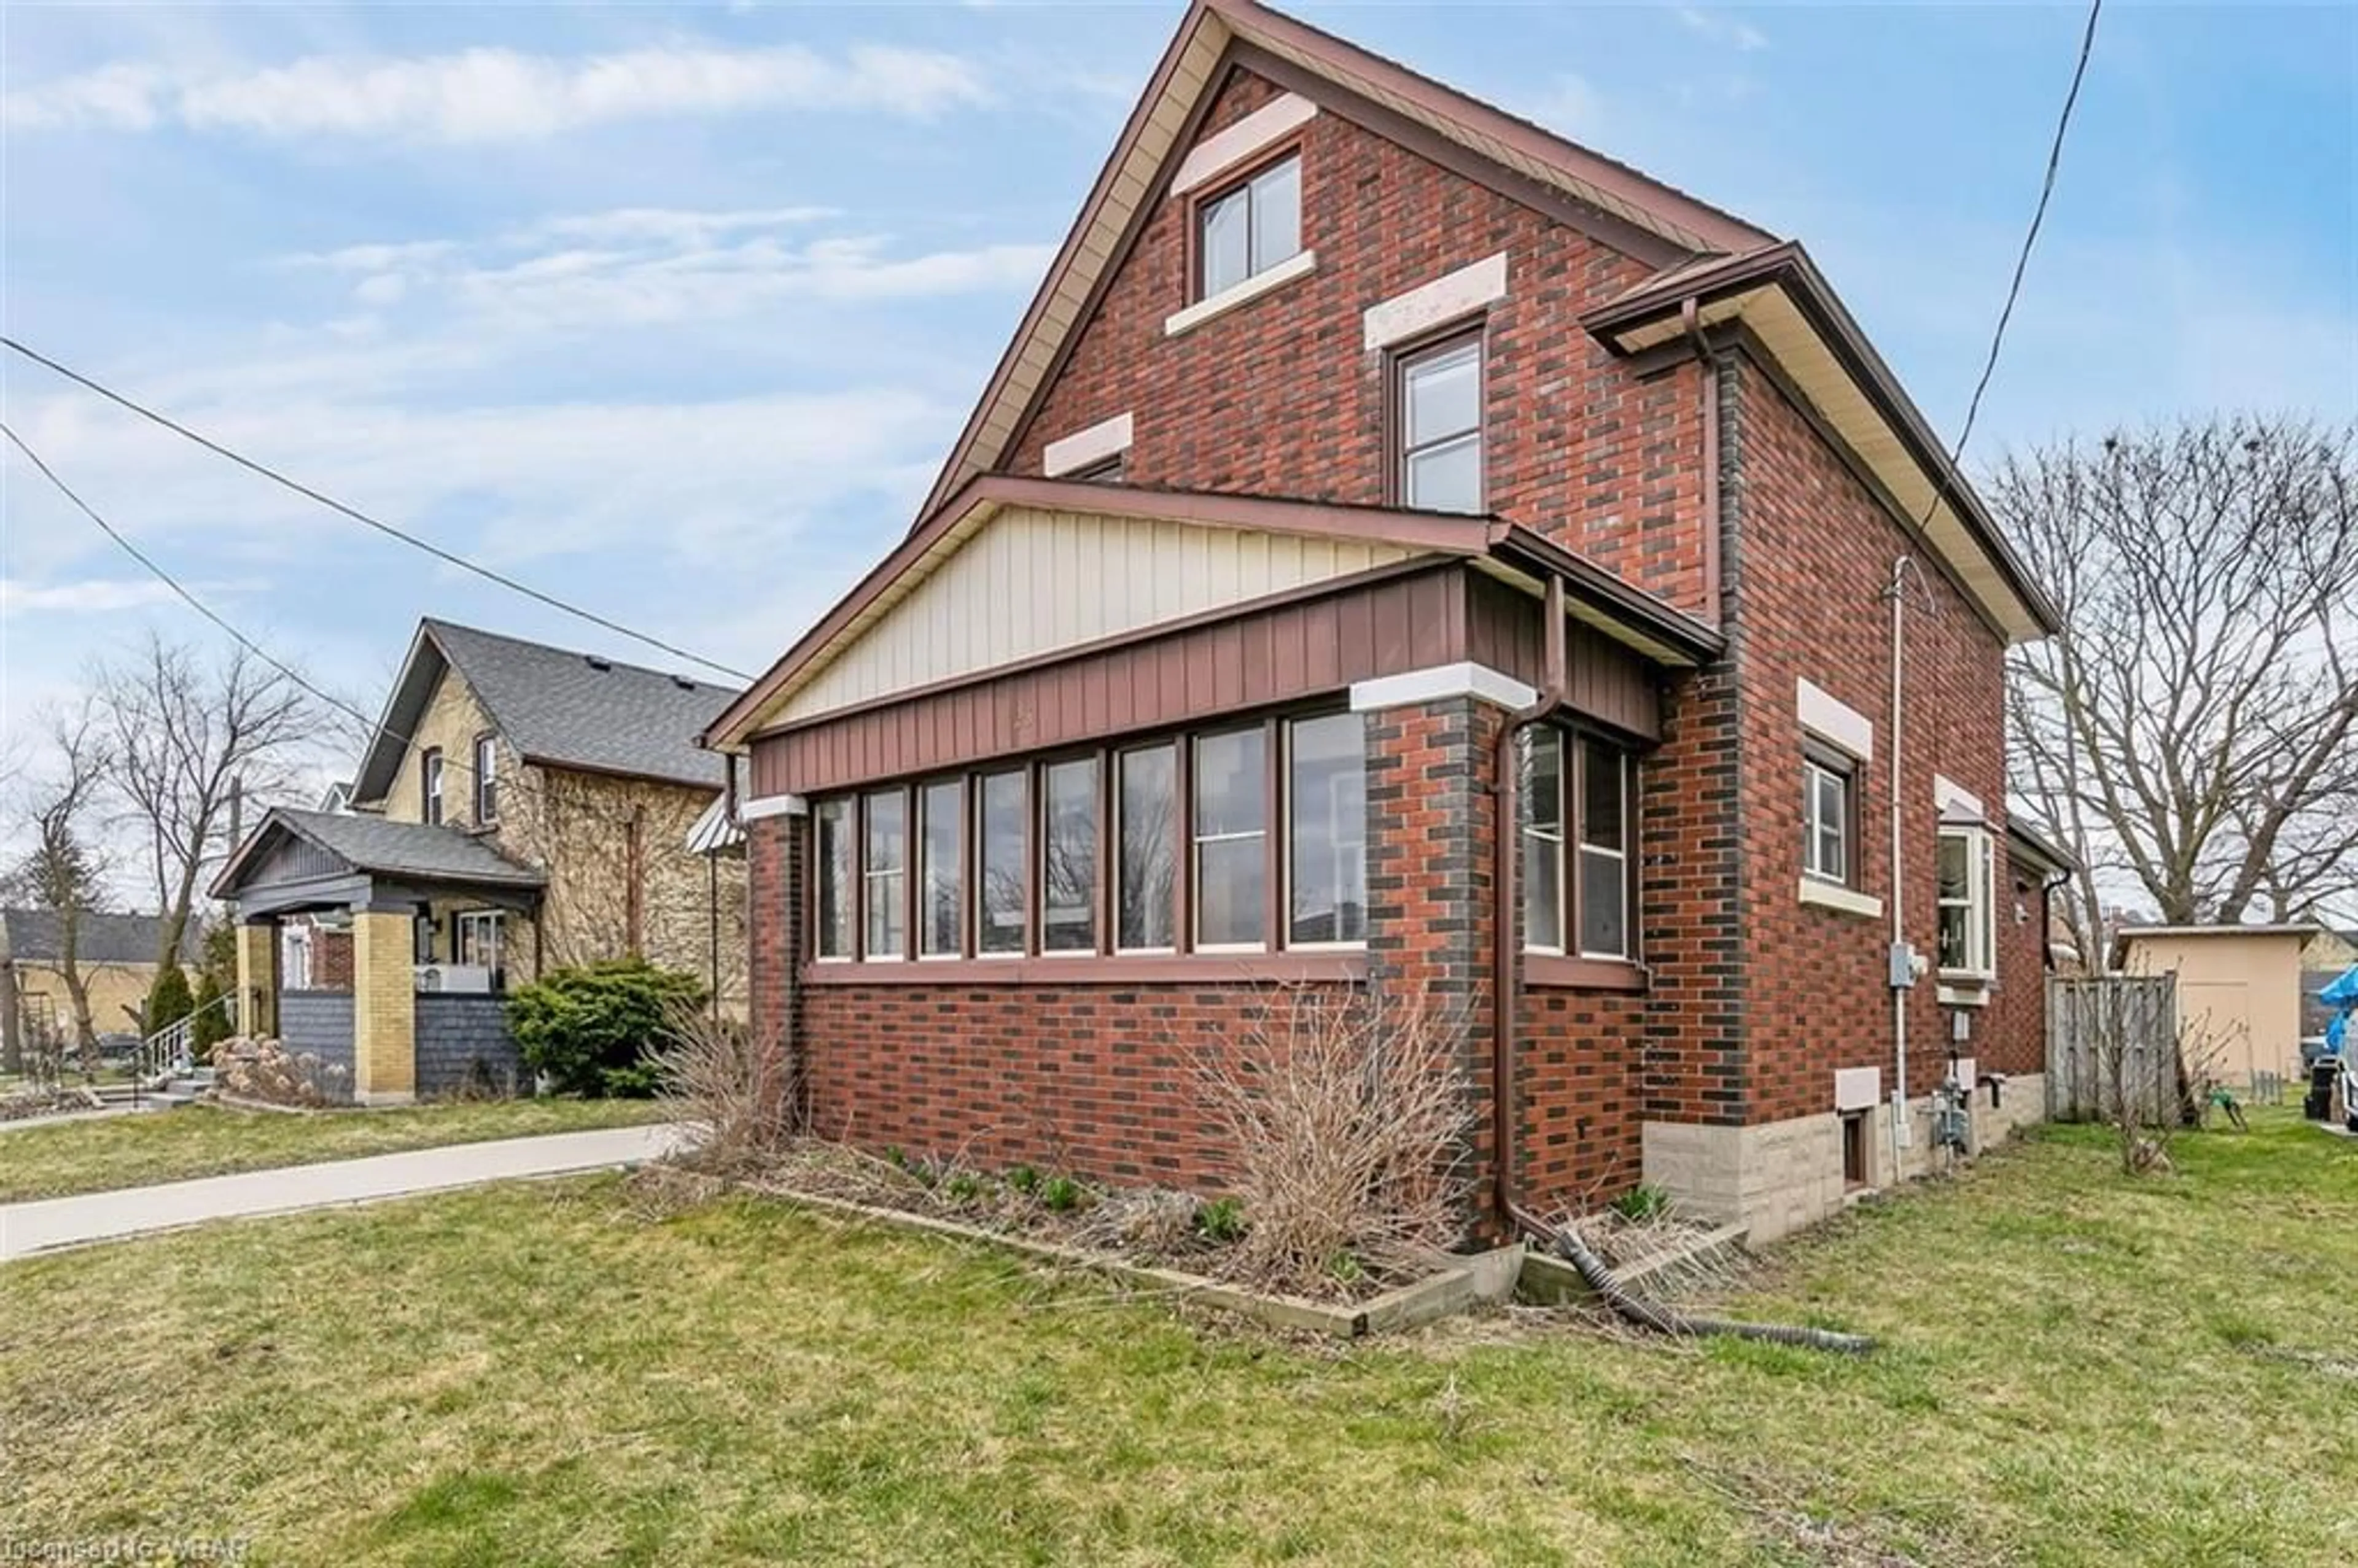 Home with brick exterior material for 23 Wilhelm St, Kitchener Ontario N2H 5R7